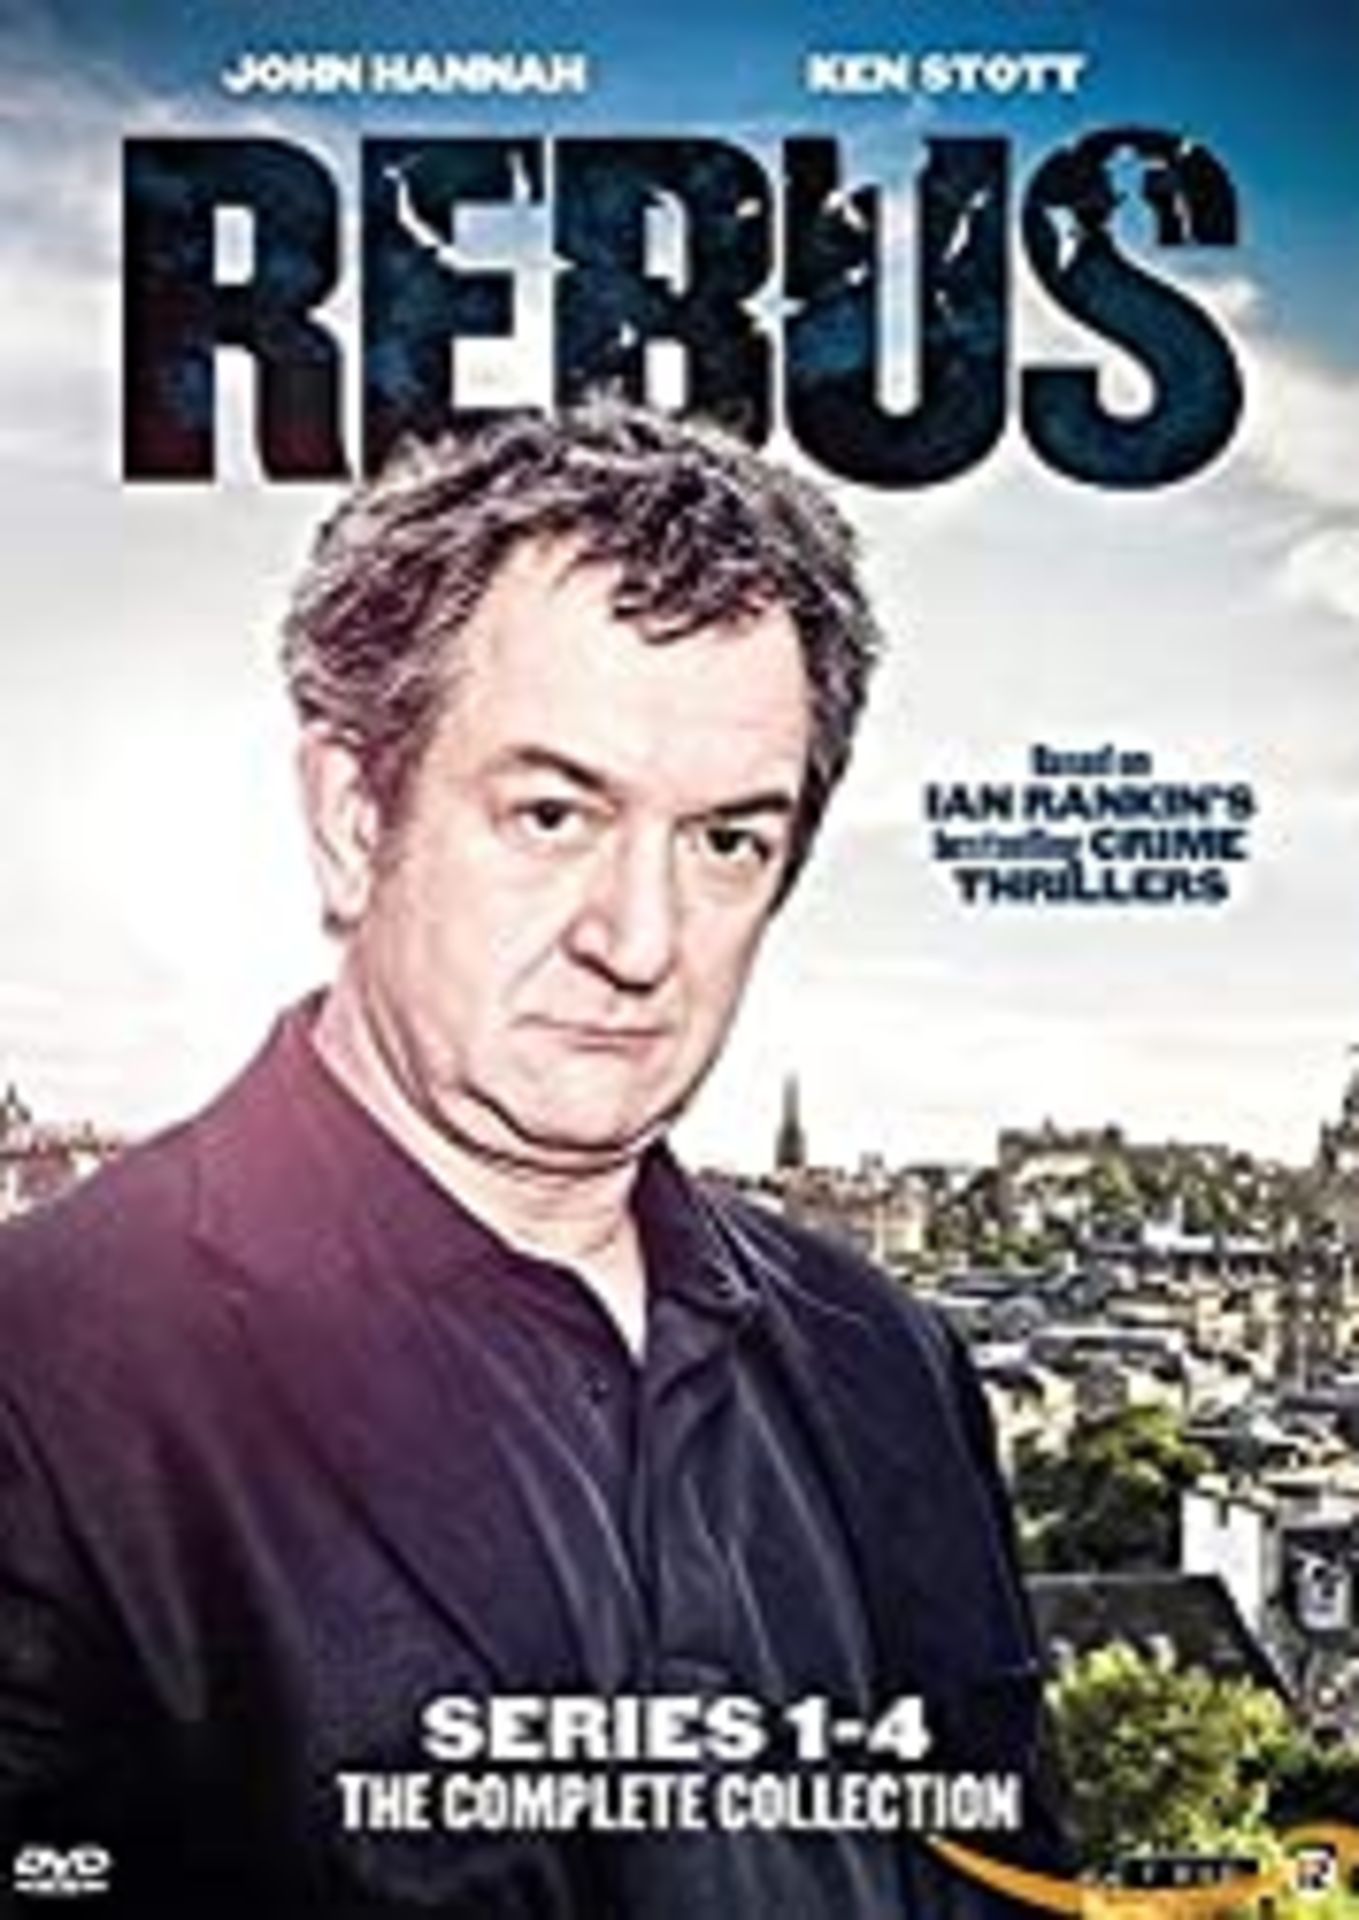 RRP £22.22 Ian Rankin's Rebus - Complete Collection